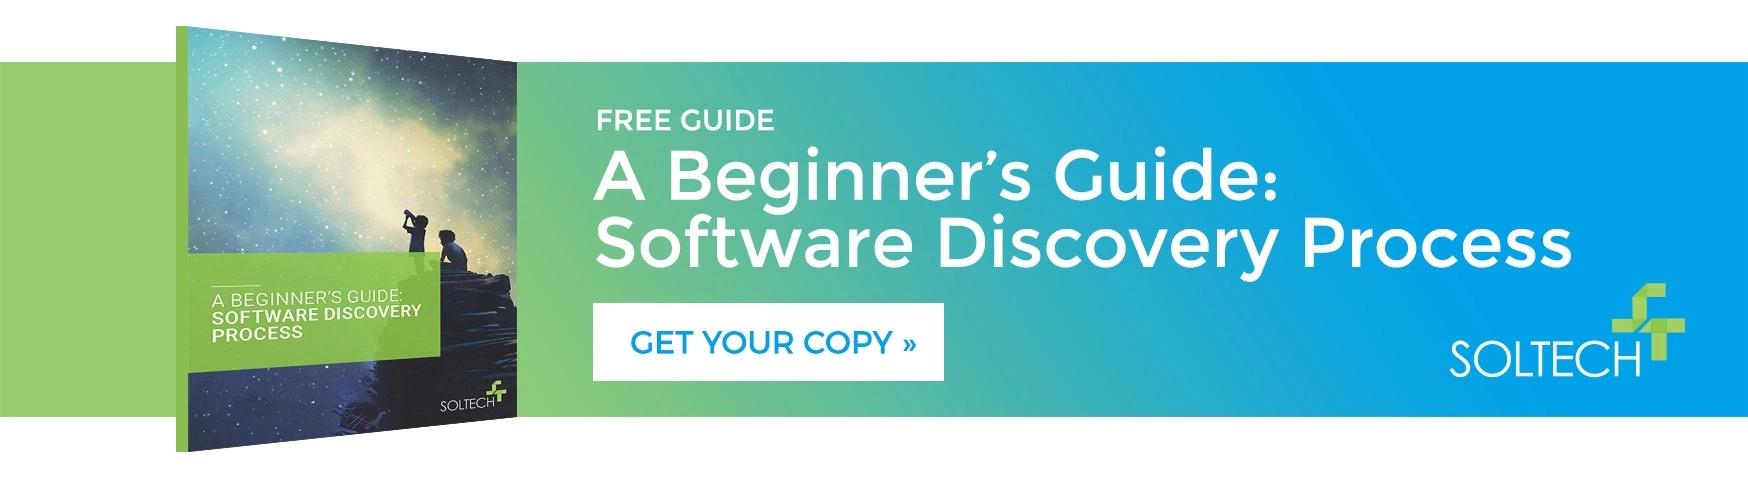 ebook-software-discovery-wide